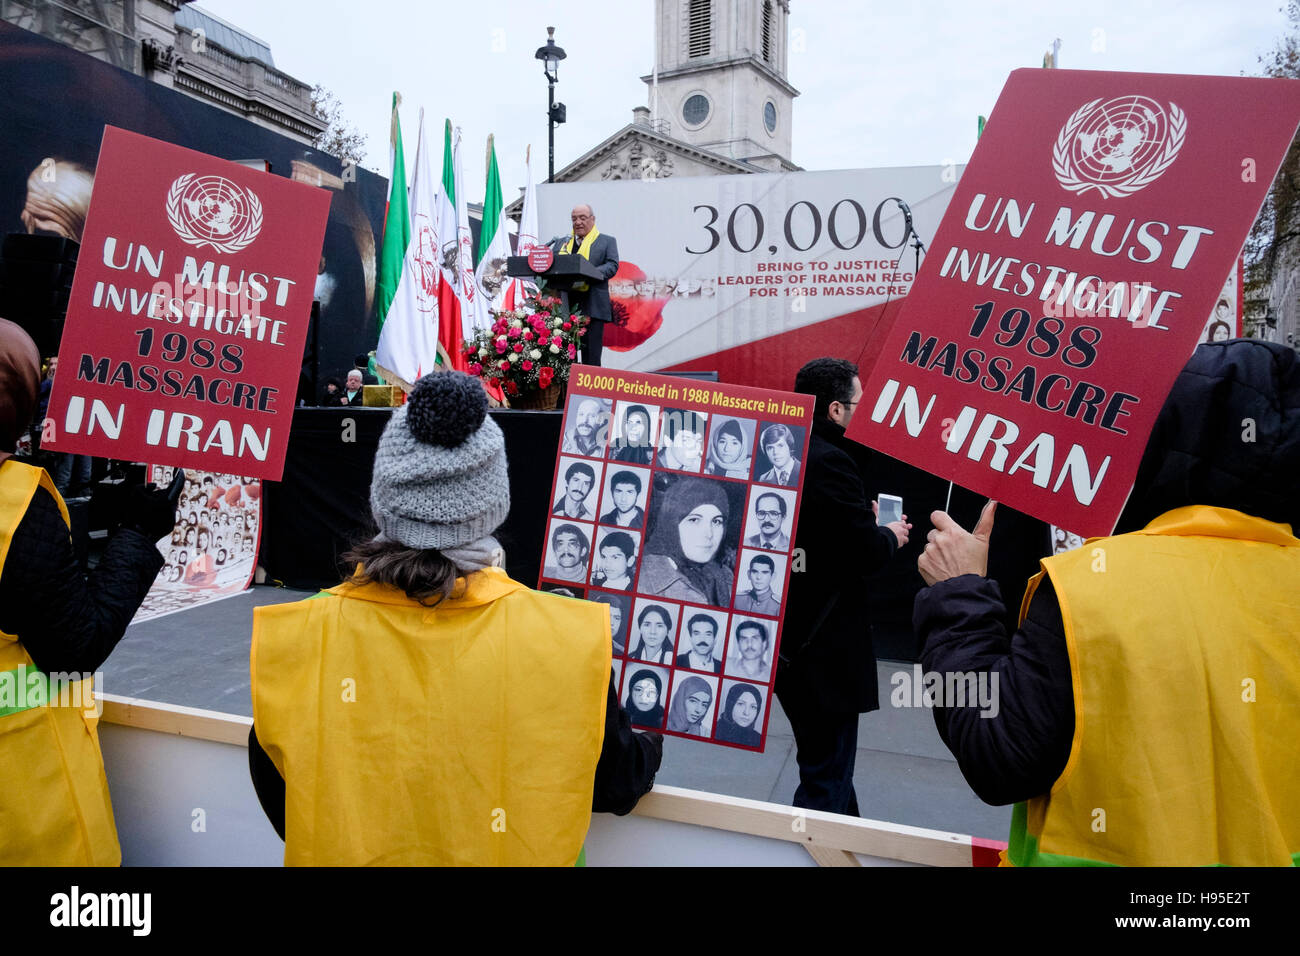 Iranian demonstrators protest against detention and murder of political prisoners by the authorities in Iran. London, UK. Stock Photo